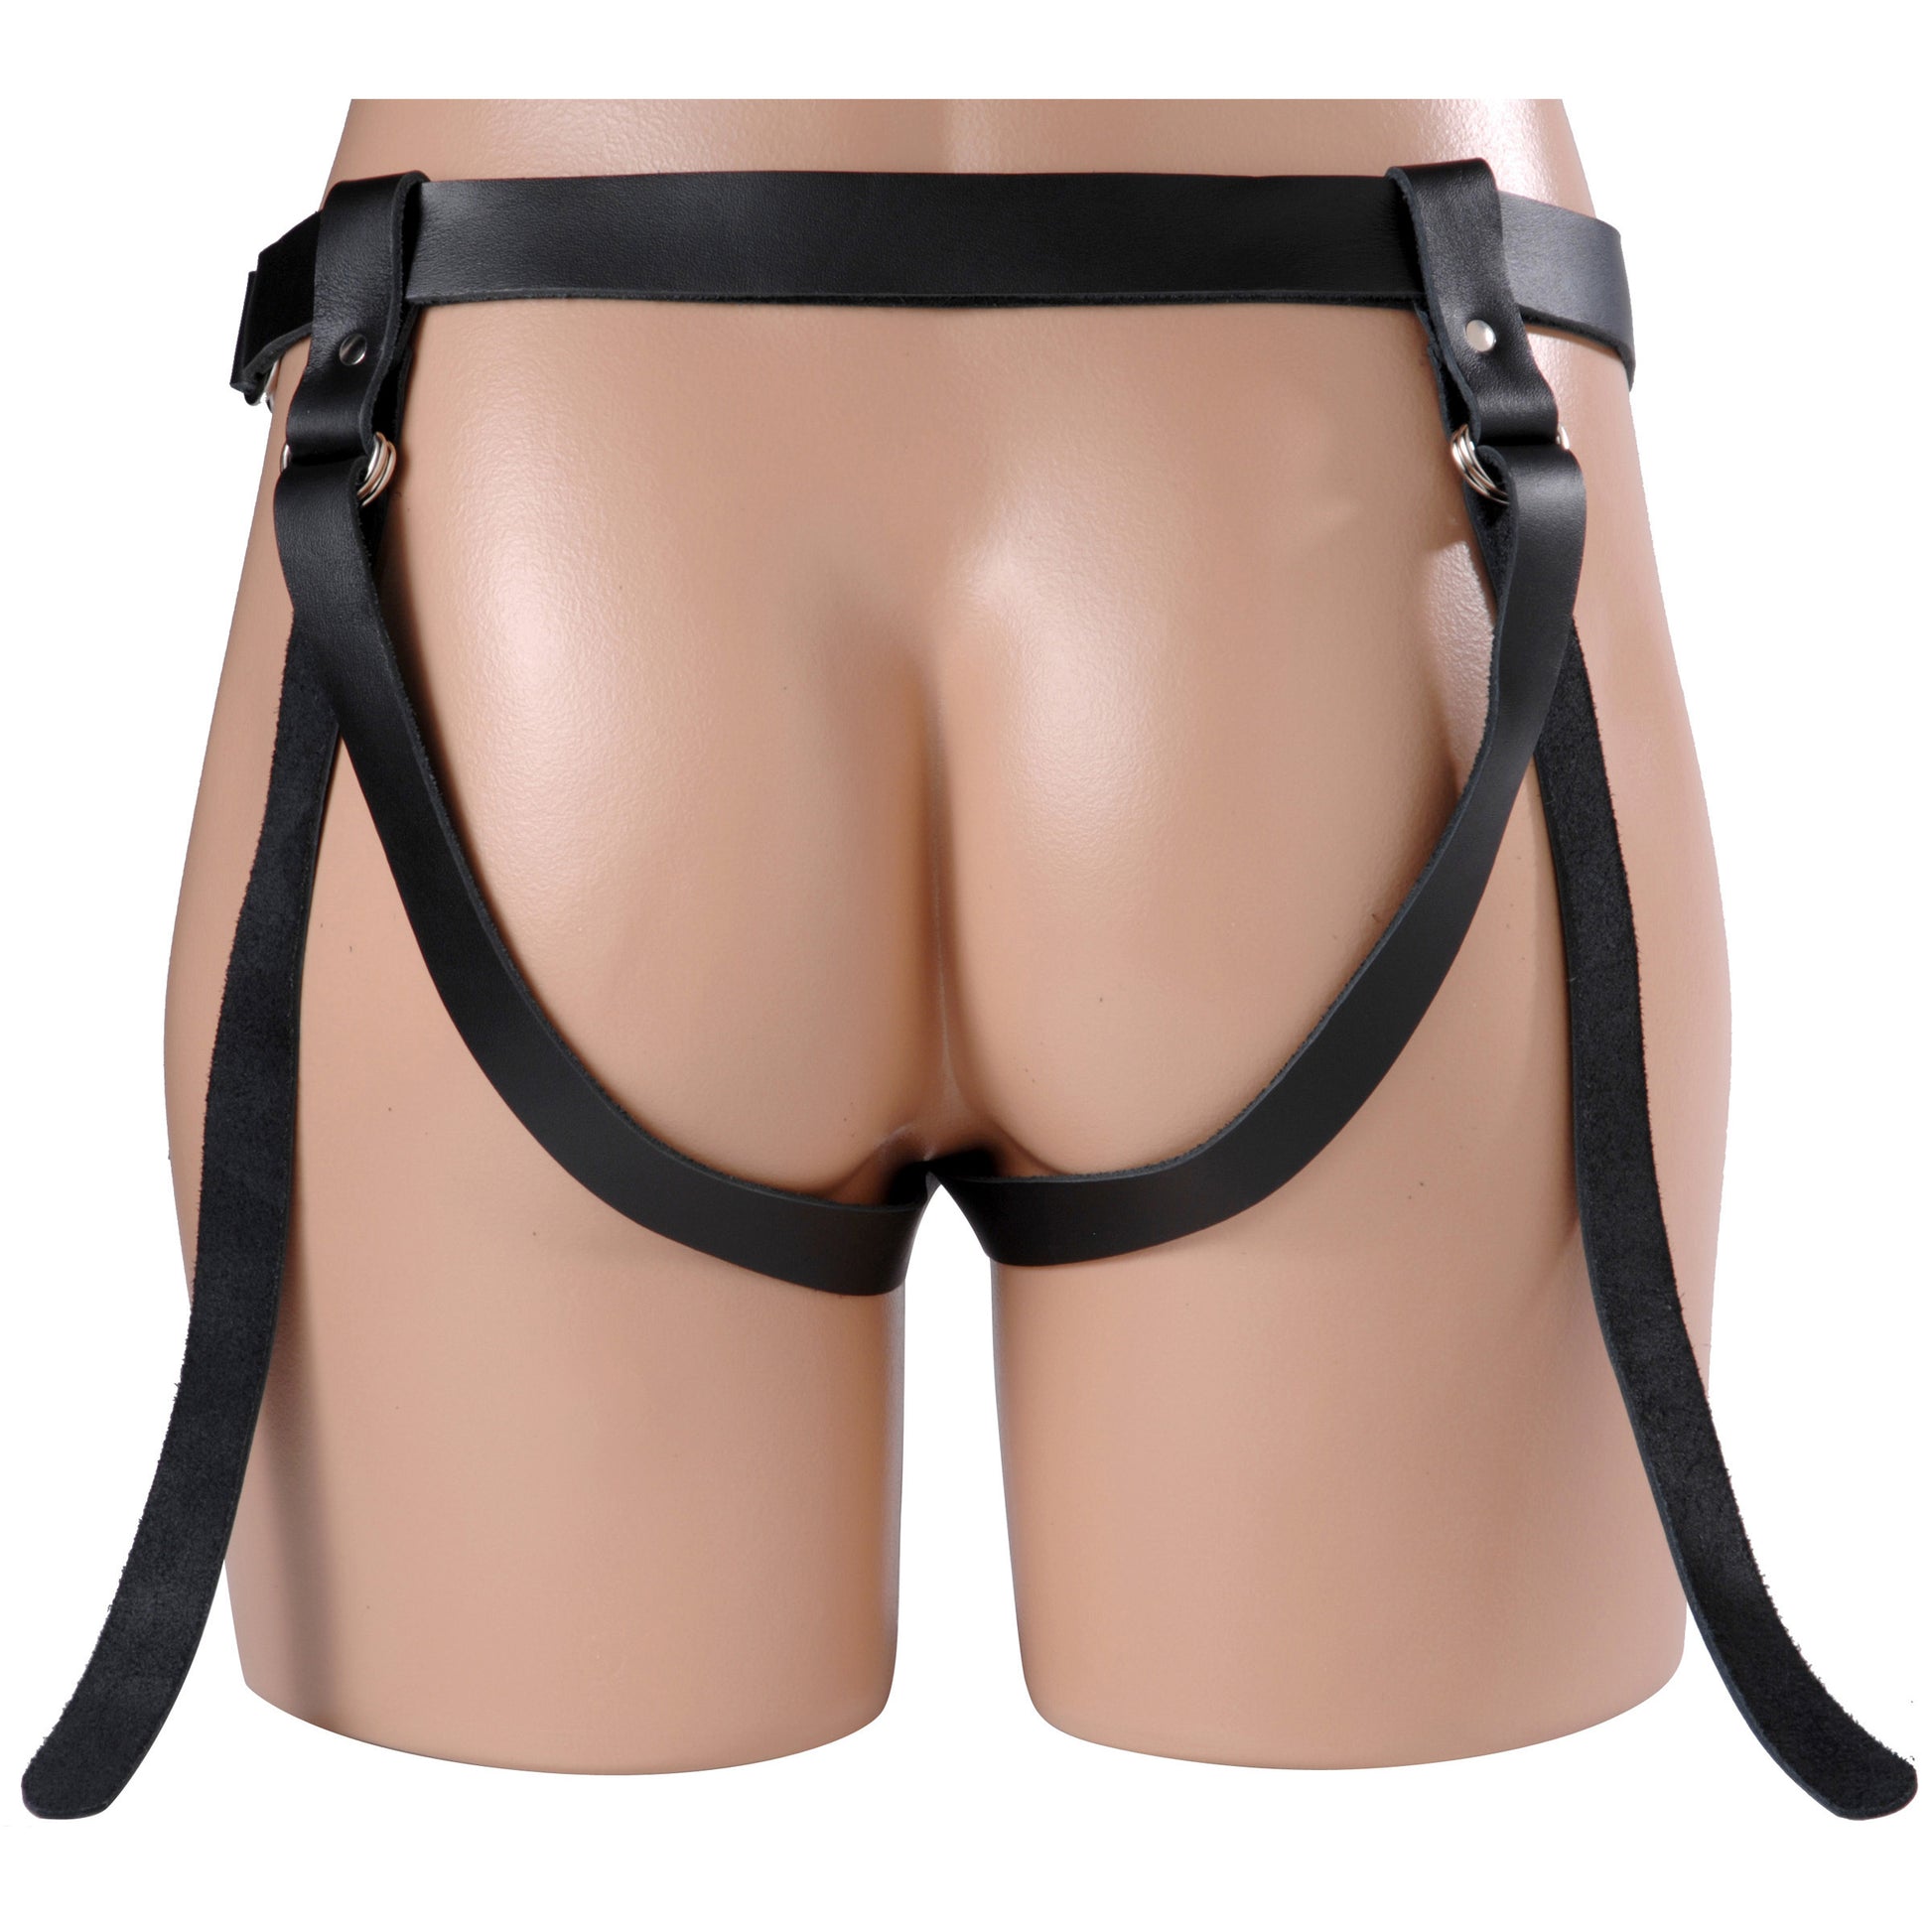 Strict Leather Two-Strap Dildo Harness - UABDSM